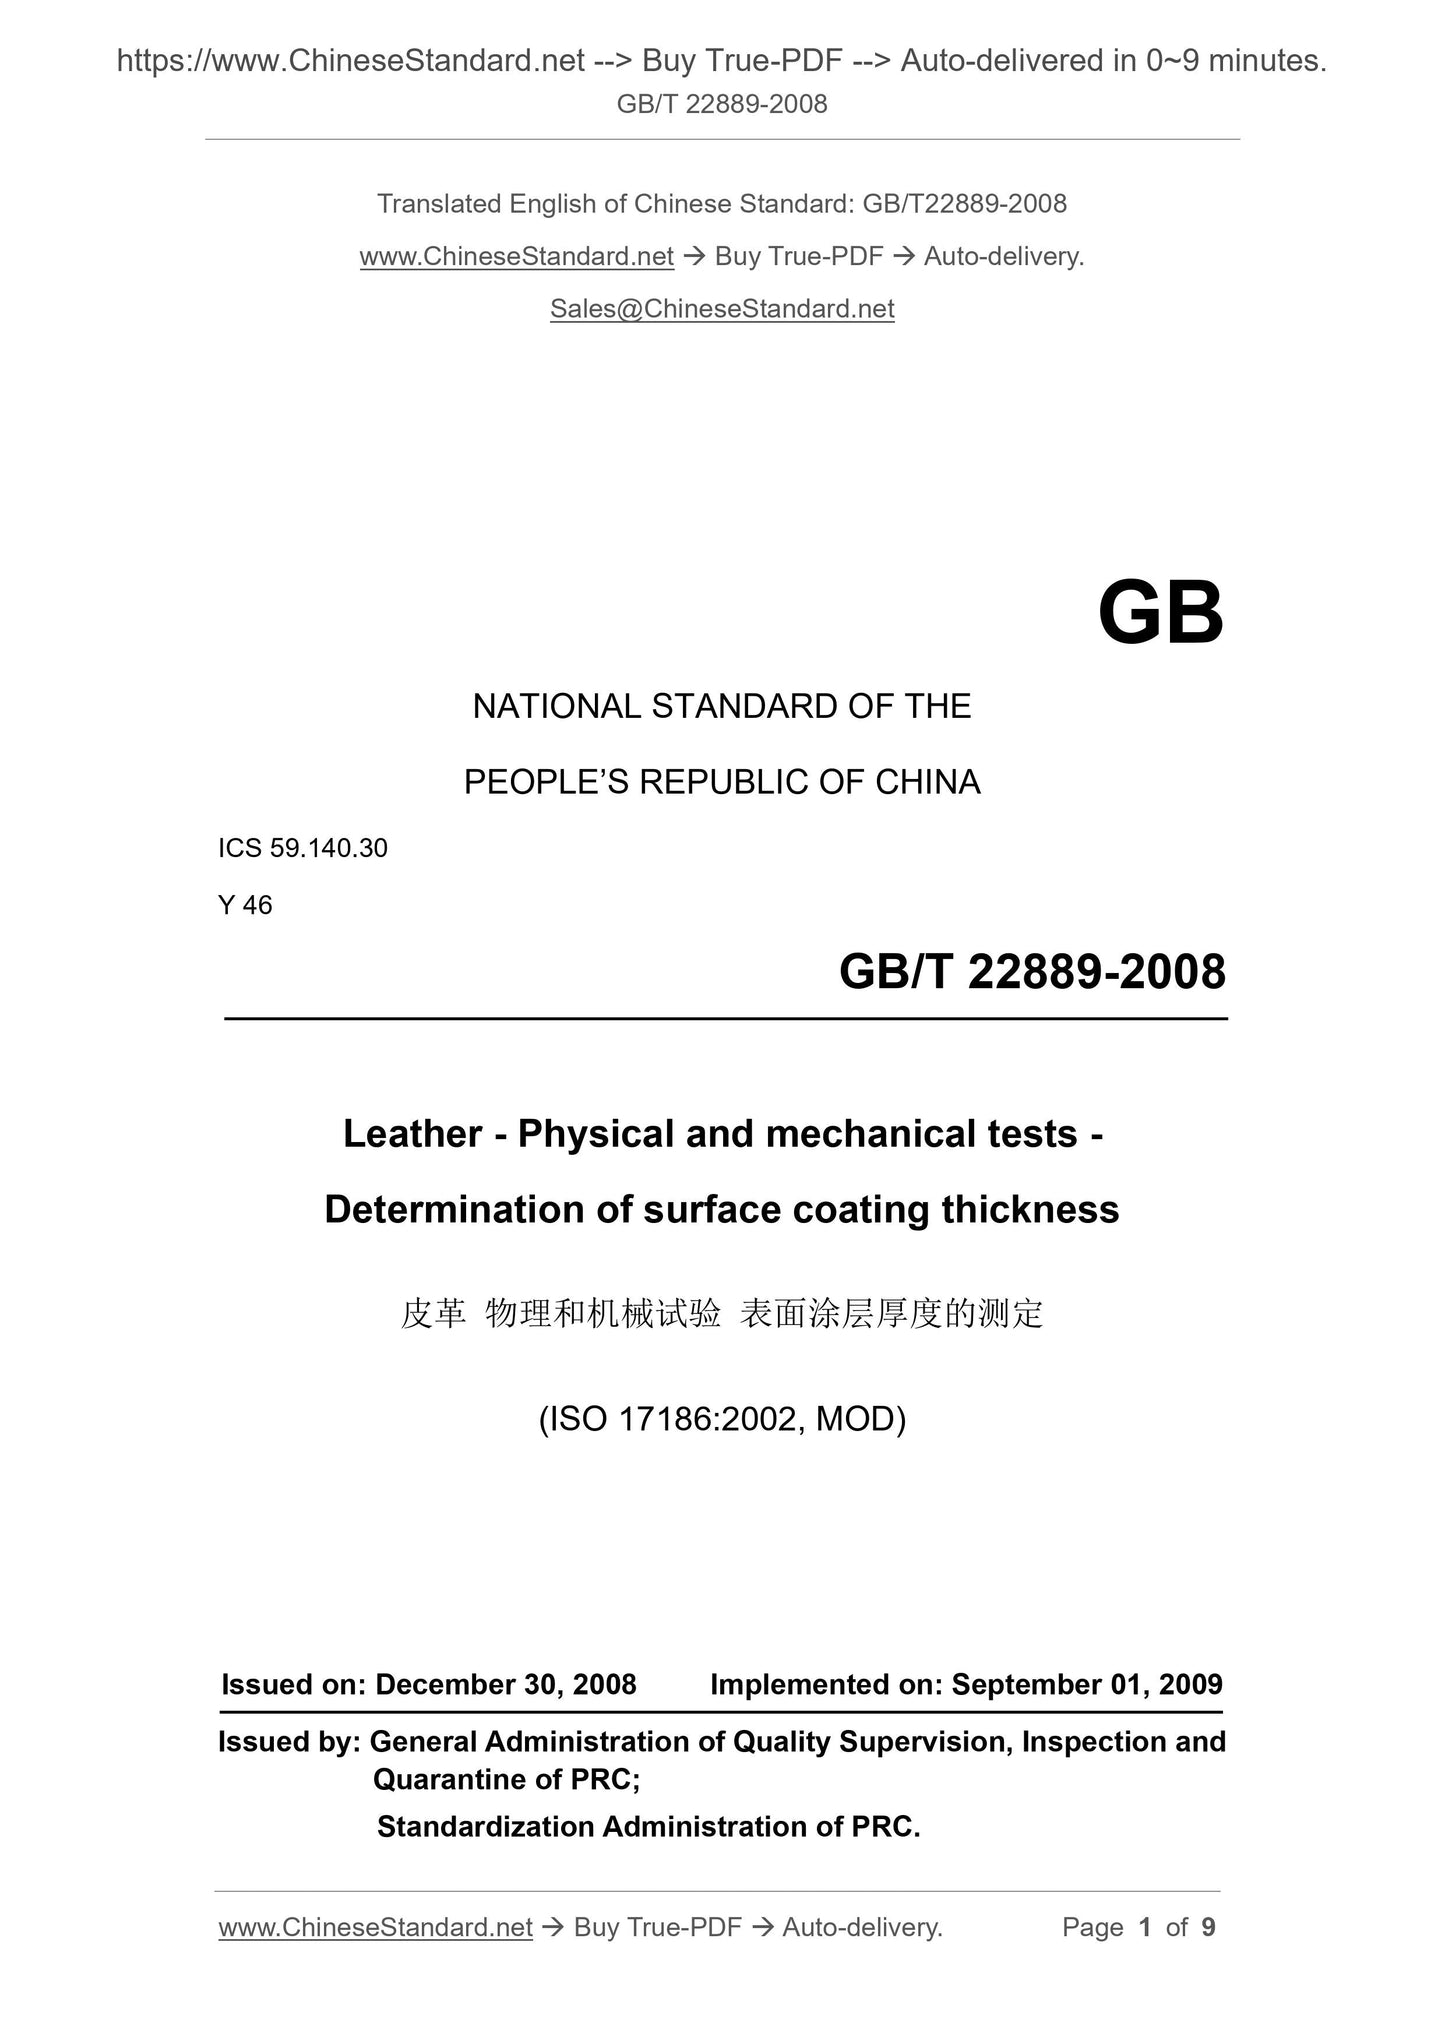 GB/T 22889-2008 Page 1